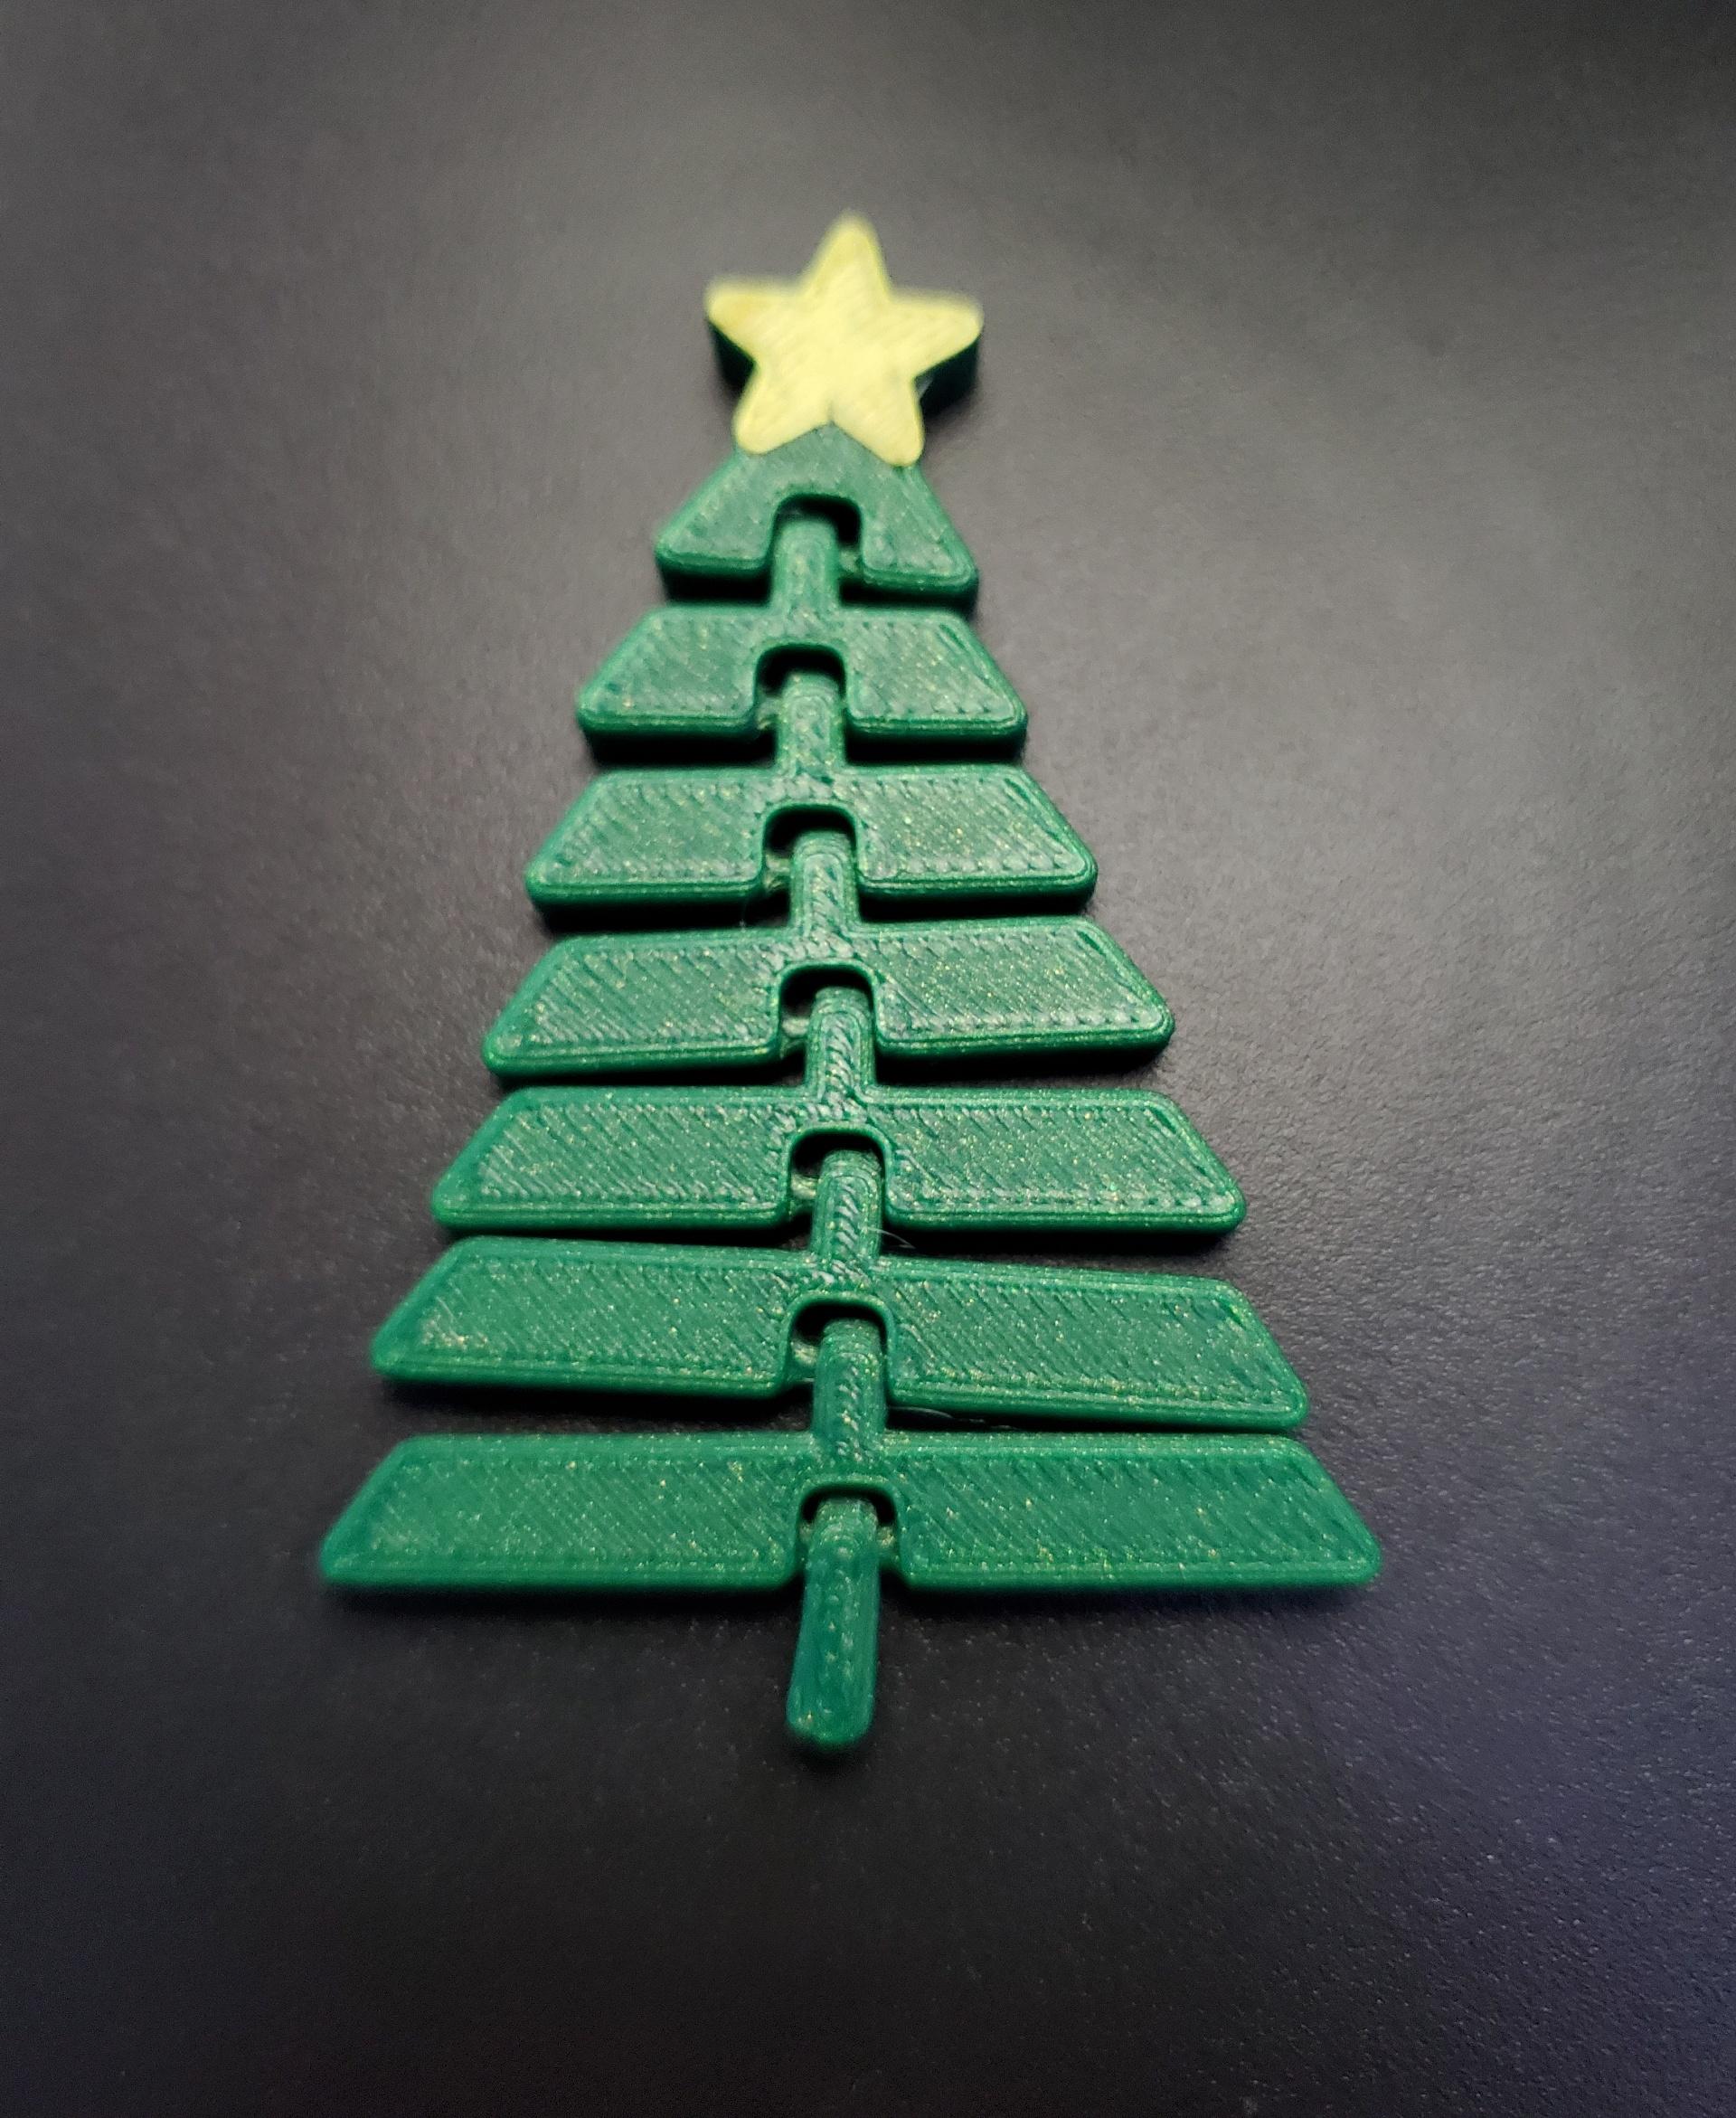 Articulated Christmas Tree with Star - Print in place fidget toy - 3mf - protopasta cloverfield metallic green - 3d model